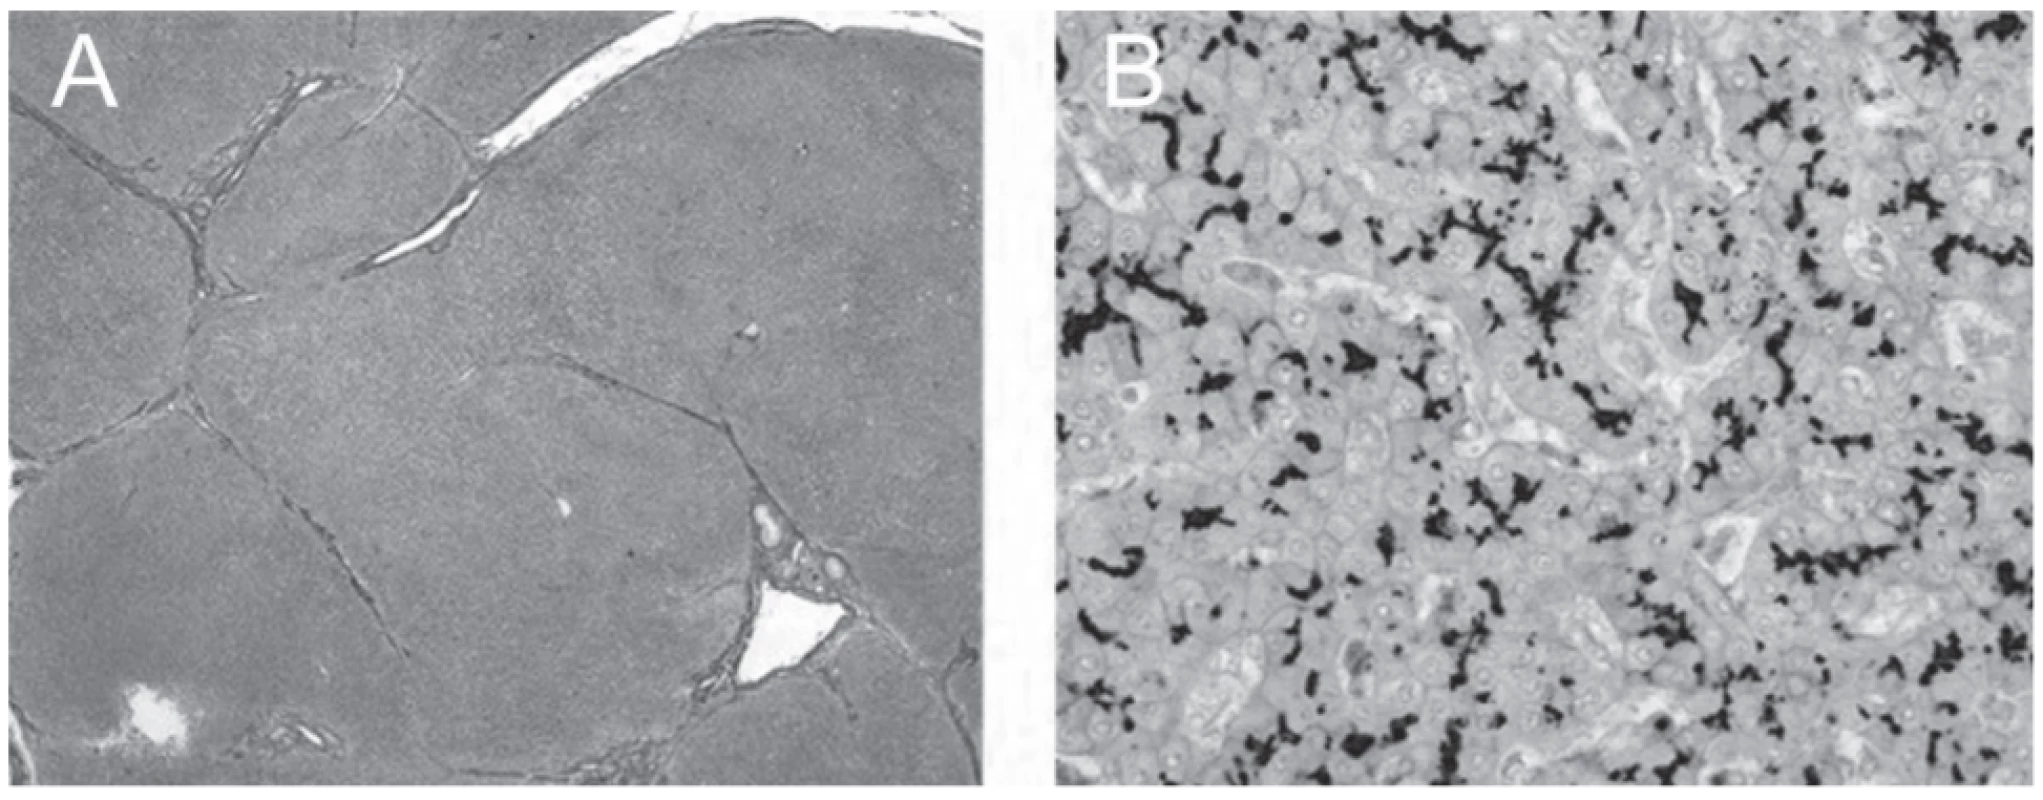 Explanted liver; septal fibrosis (A) and preserved immunohistochemical expression of BSEP along bile canaliculi (B).
(A) Verhoeff’s van Gieson, original magnification x40. (B) Rabbit polyclonal anti-BSEP primary antibody (NBP1-89319, Novus
Biologicals, Abingdon, UK), hematoxylin counterstain; original magnification x400.